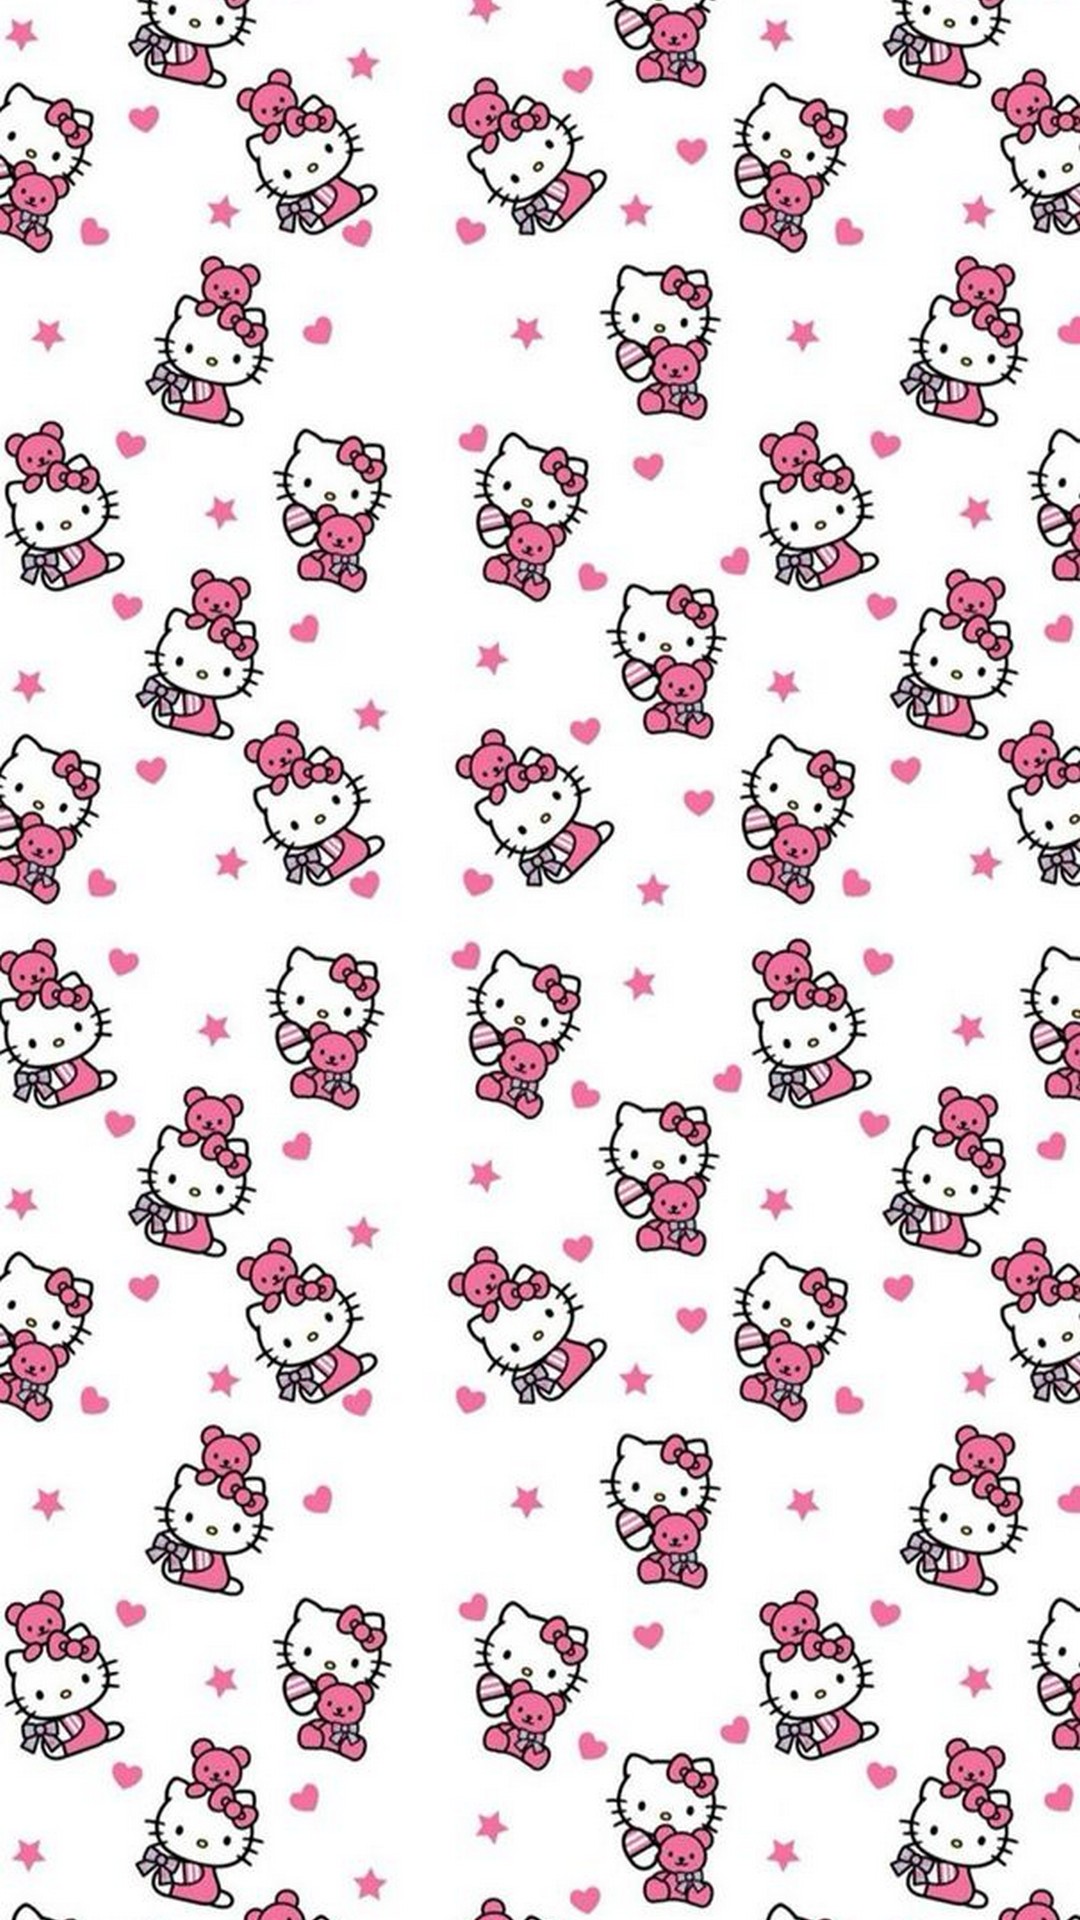 Wallpaper Hello Kitty Characters iPhone with image resolution 1080x1920 pixel. You can make this wallpaper for your iPhone 5, 6, 7, 8, X backgrounds, Mobile Screensaver, or iPad Lock Screen